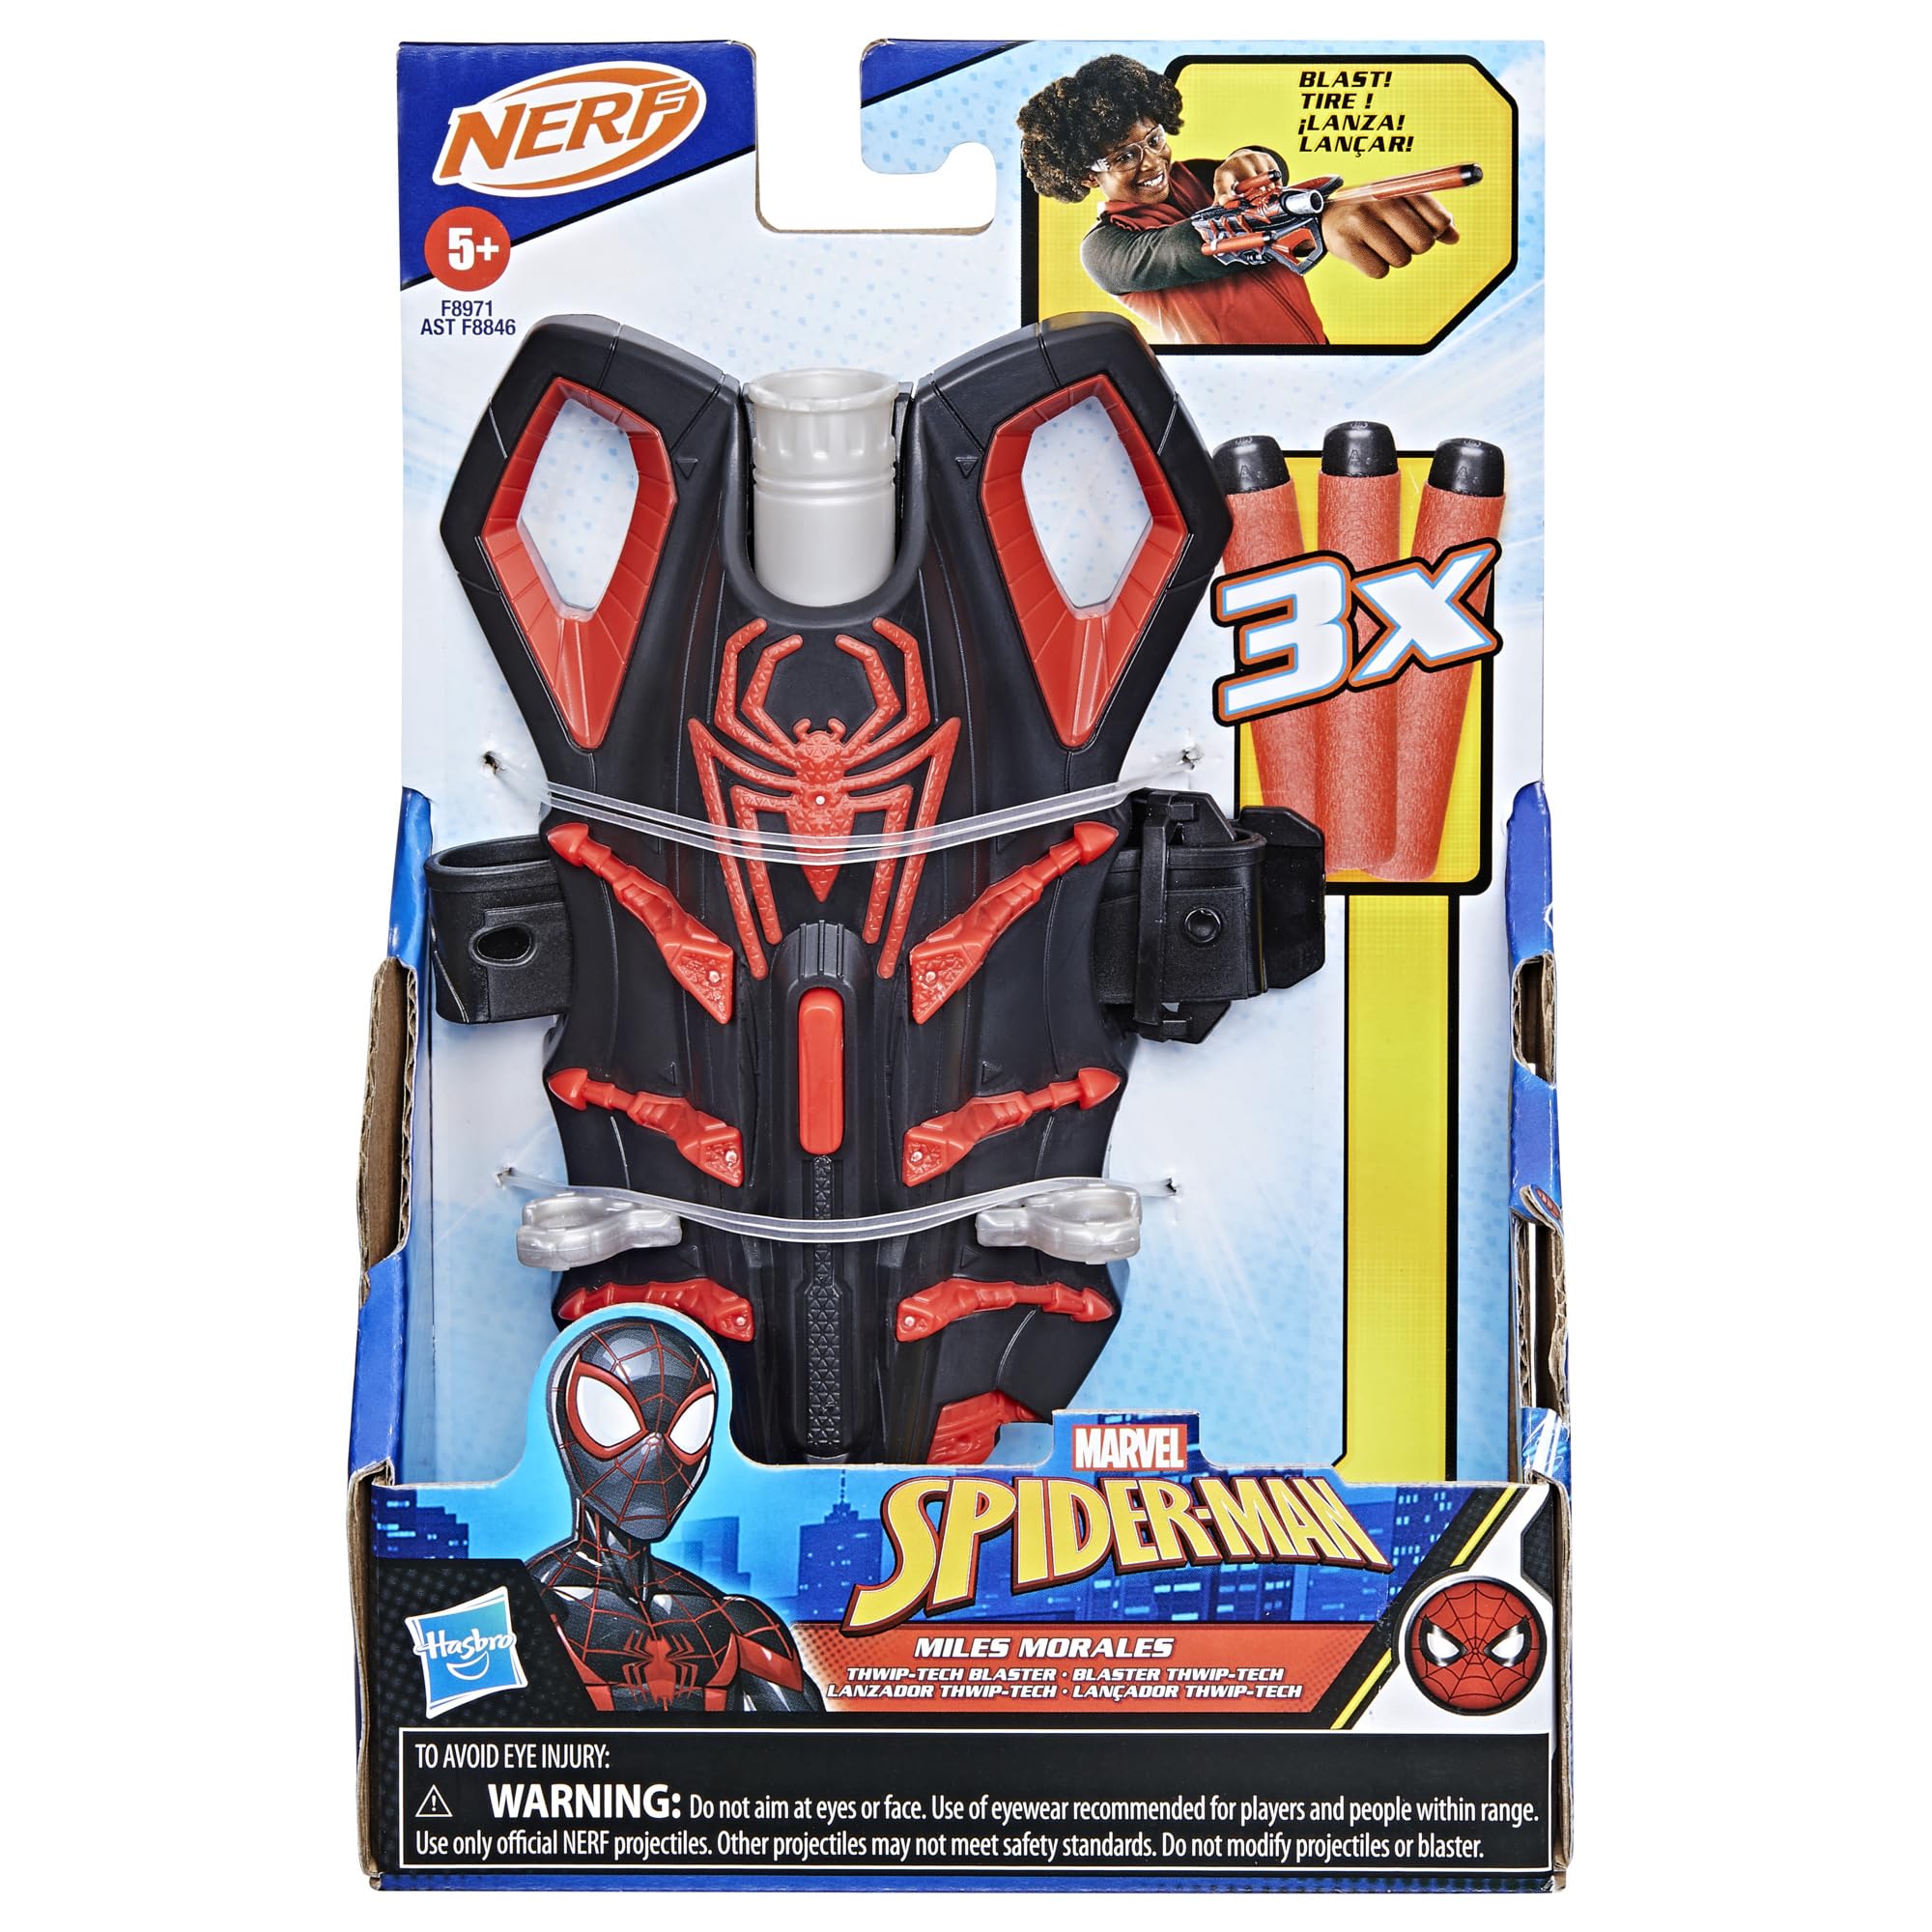 Marvel NERF Spider-Man Miles Morales Thwip-Tech Blaster, Includes 3 Darts, Web Shooter, Role Play Toy for Kids 5 and Up